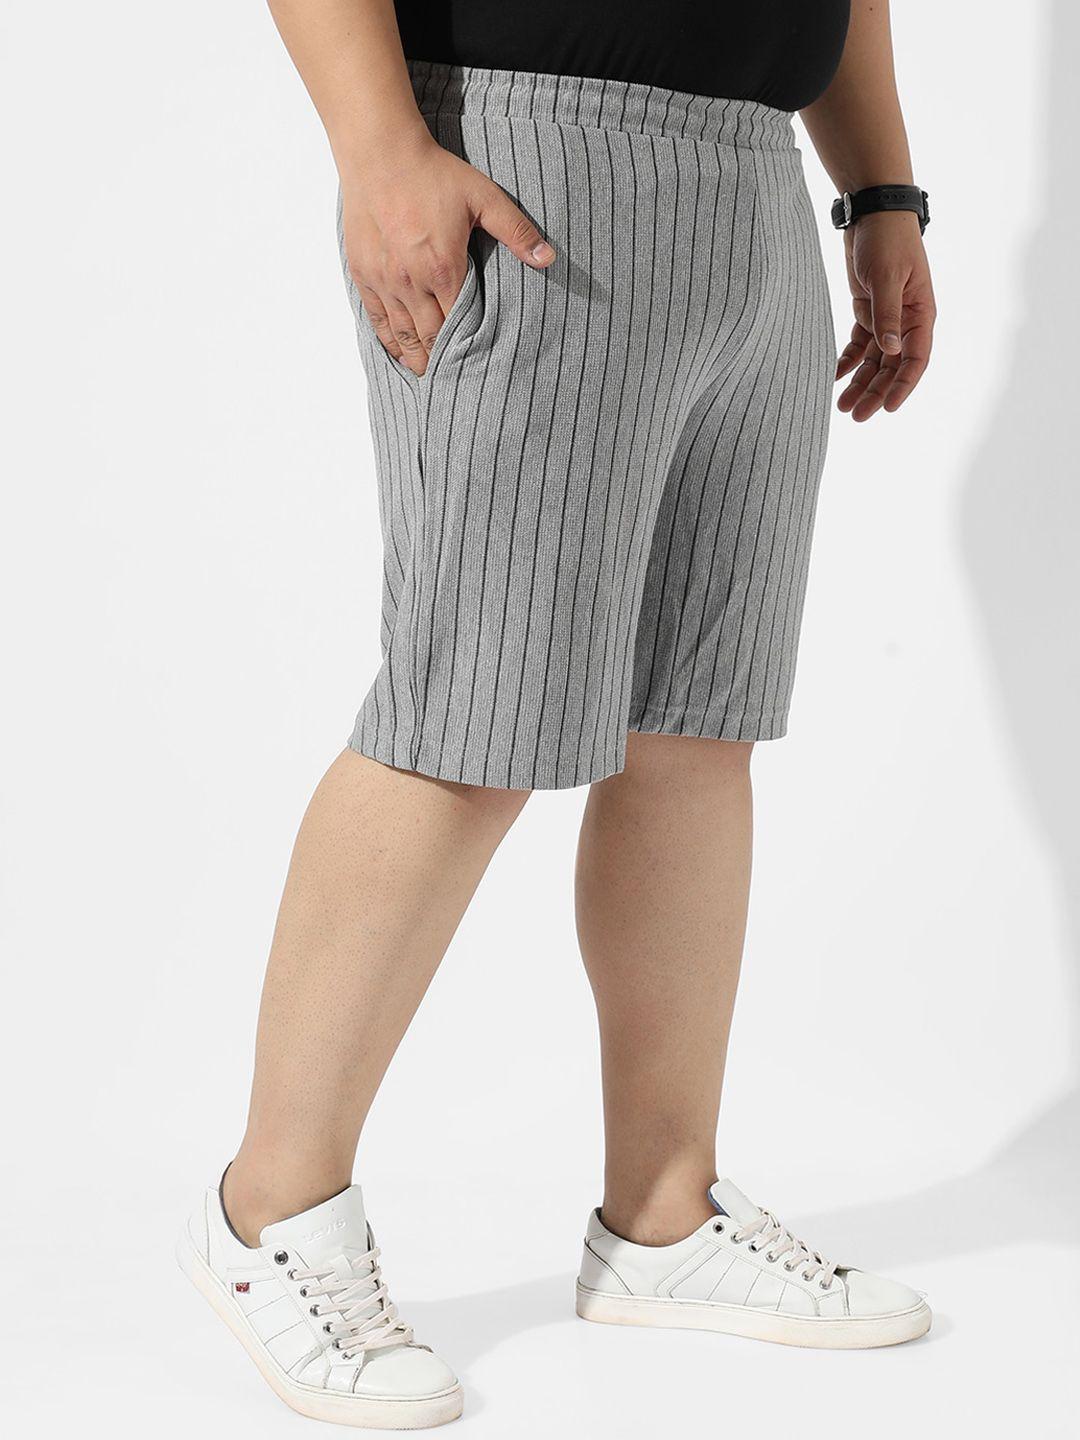 instafab-plus-men-striped-outdoor-with-technology-shorts